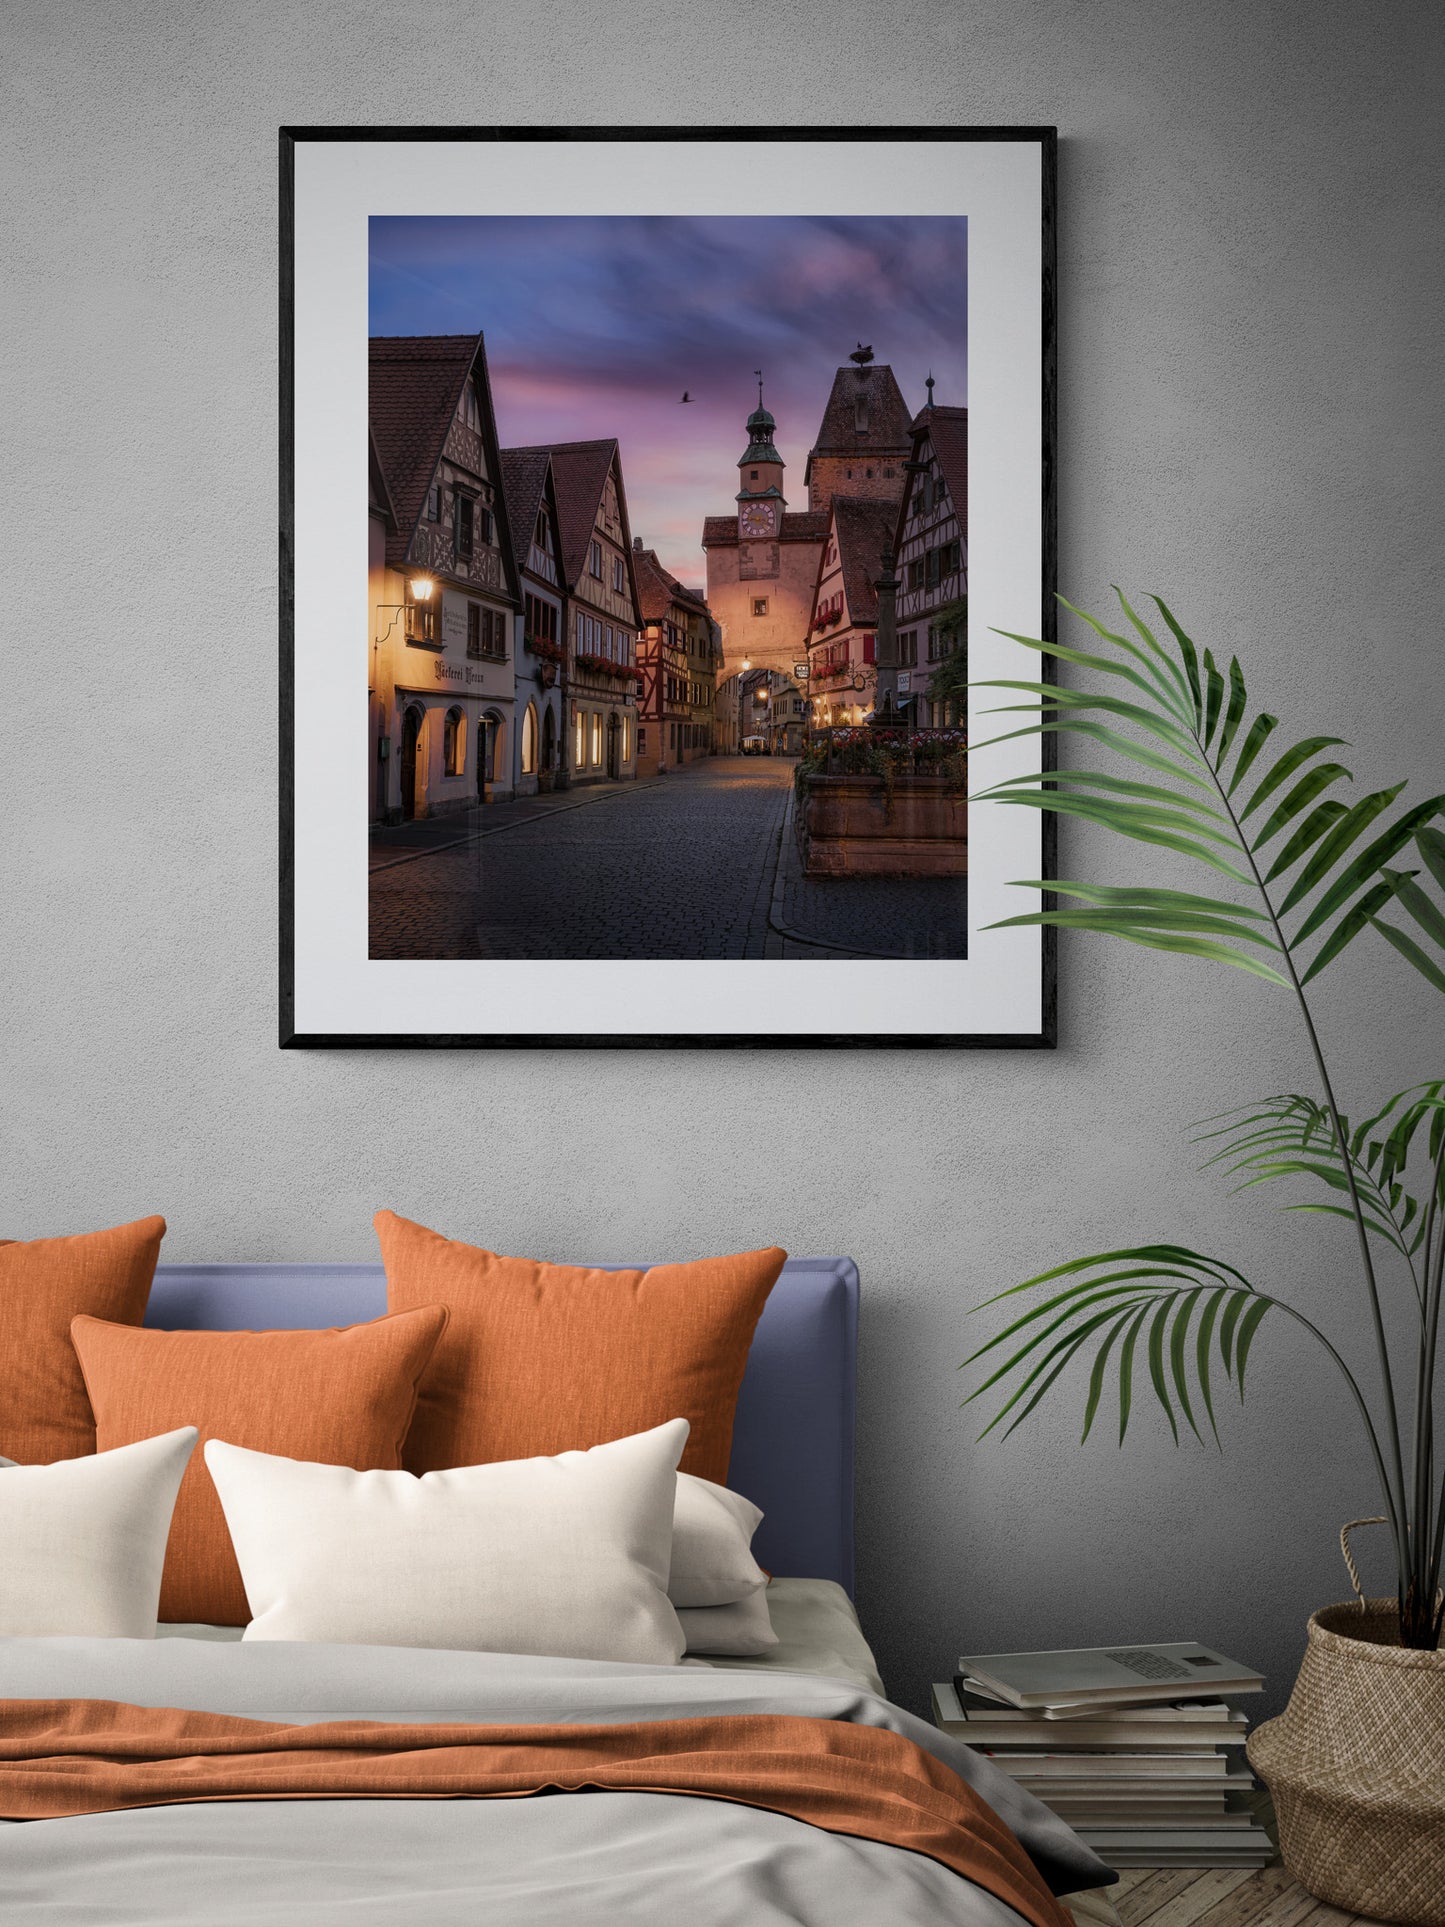 Image Title: Daddy is coming Photographer: Marcus Danz Location: Rothenburg ob der Tauber, Germany  Image description: Beautiful sunset view of the Markus Tower n the romantic town of Rothenburg ob der Tauber. High quality Fine Art print up to 36 inch / around 90 centimeters on Hahnemühle paper available. Large variant in bedroom.